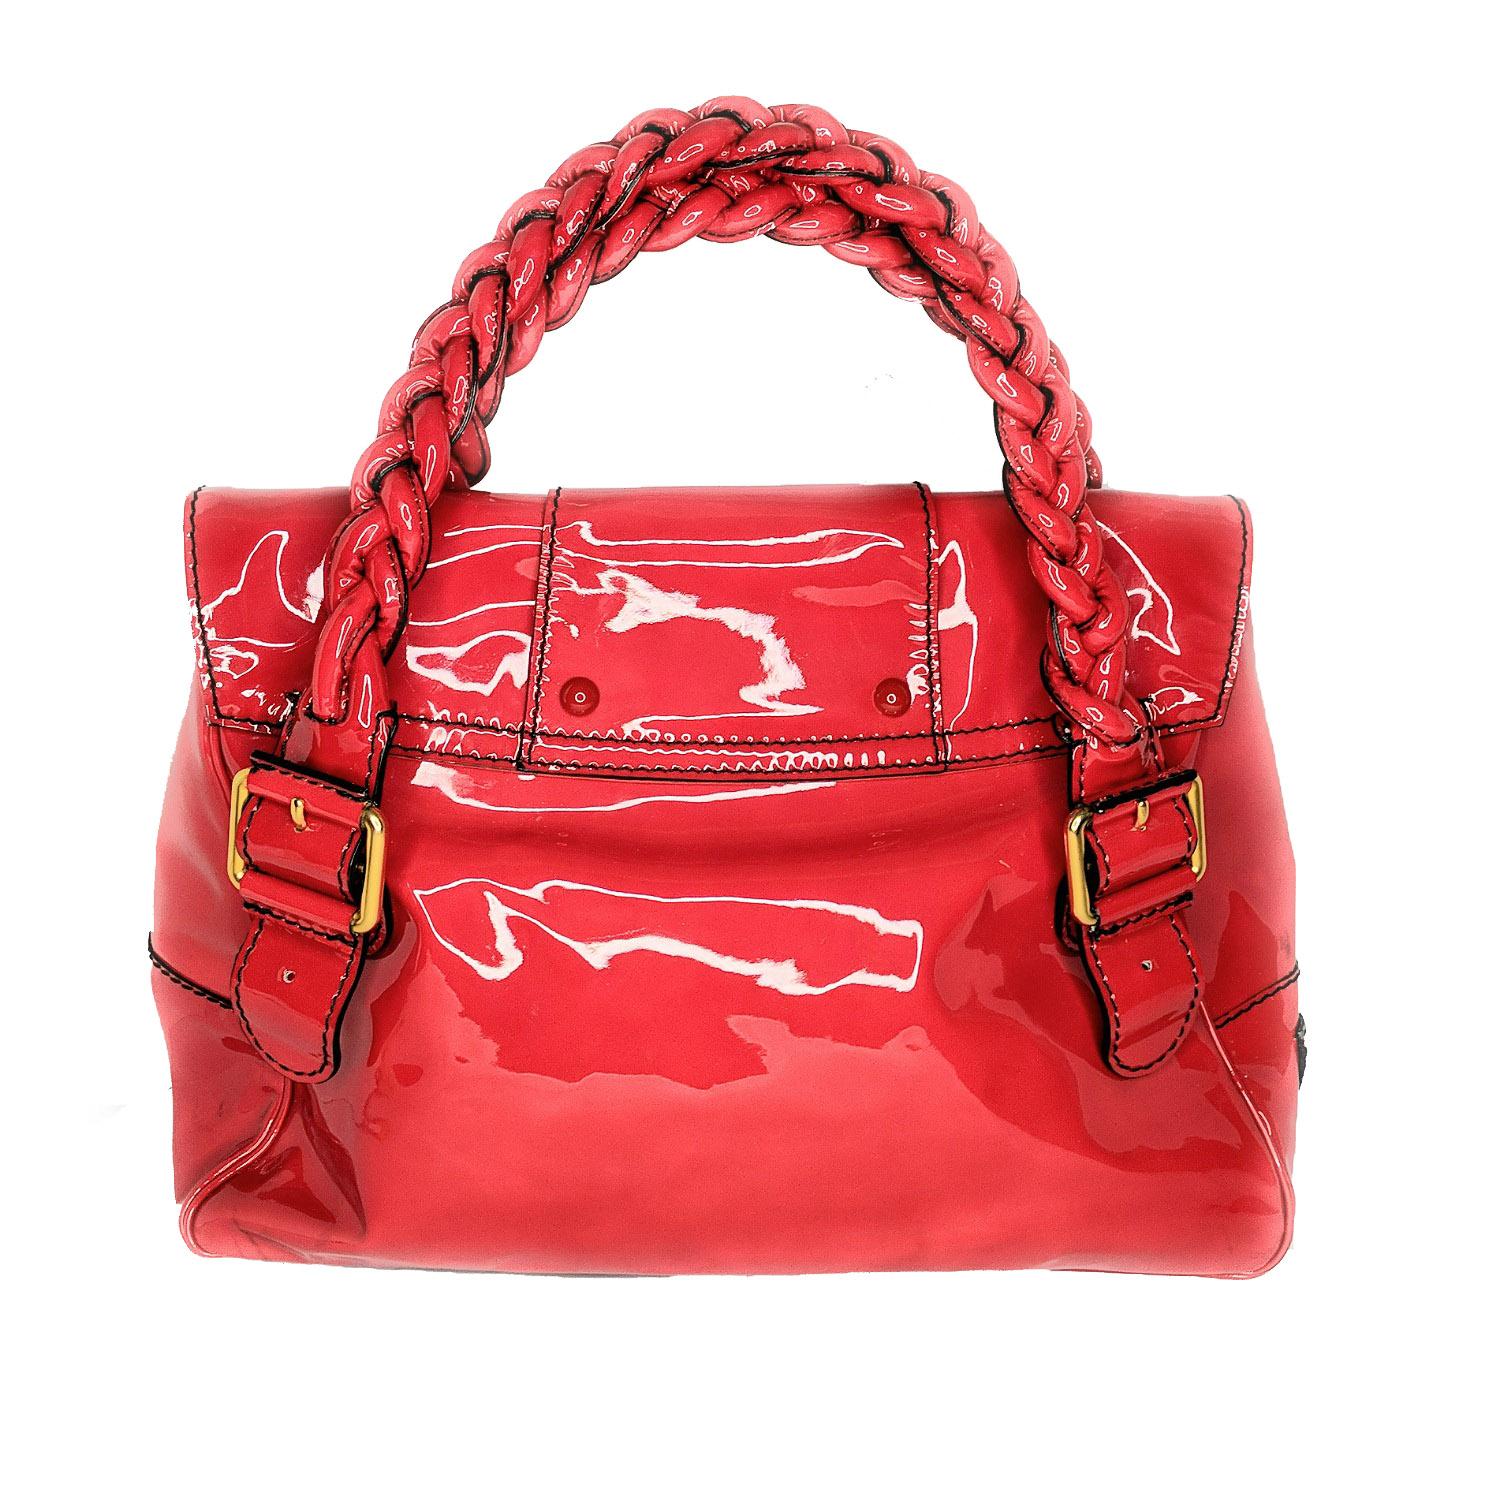 This is crafted of shiny patent leather in red. The bag features braided top handles and strap closures with two facing flap pockets and a cross over flap with a strap. This opens to a fabric interior with room for your everyday essentials with the